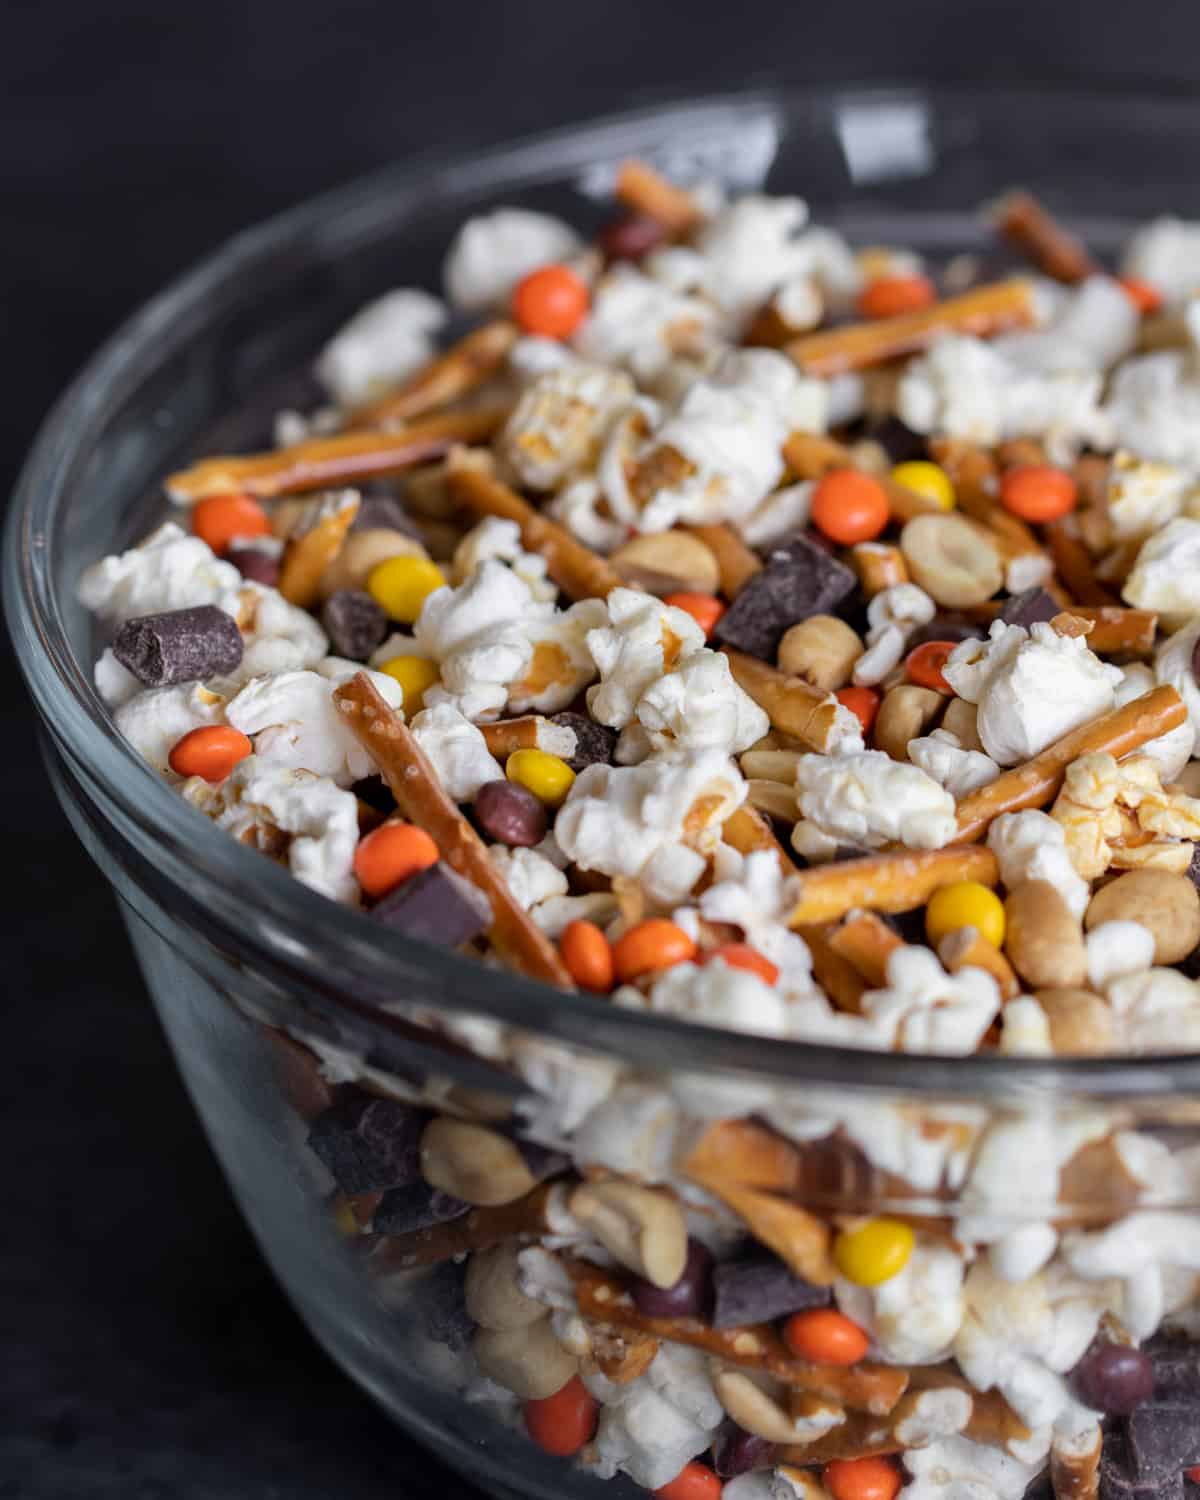 A glass mixing bowl filled with snacks.